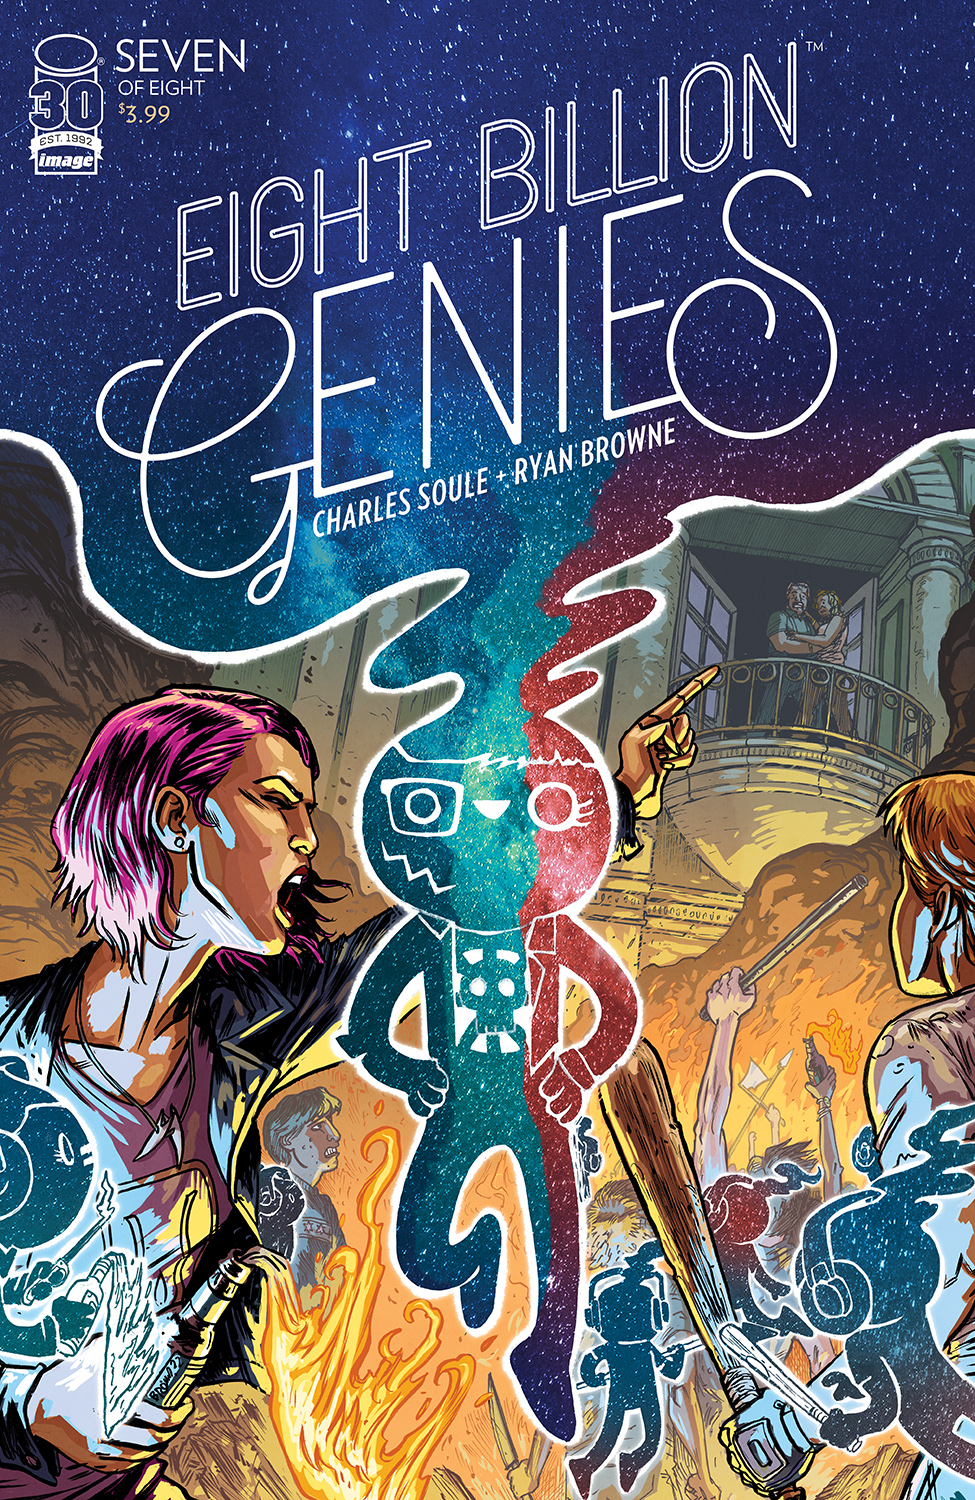 Eight Billion Genies #7 Cover A Browne (Mature) (Of 8)